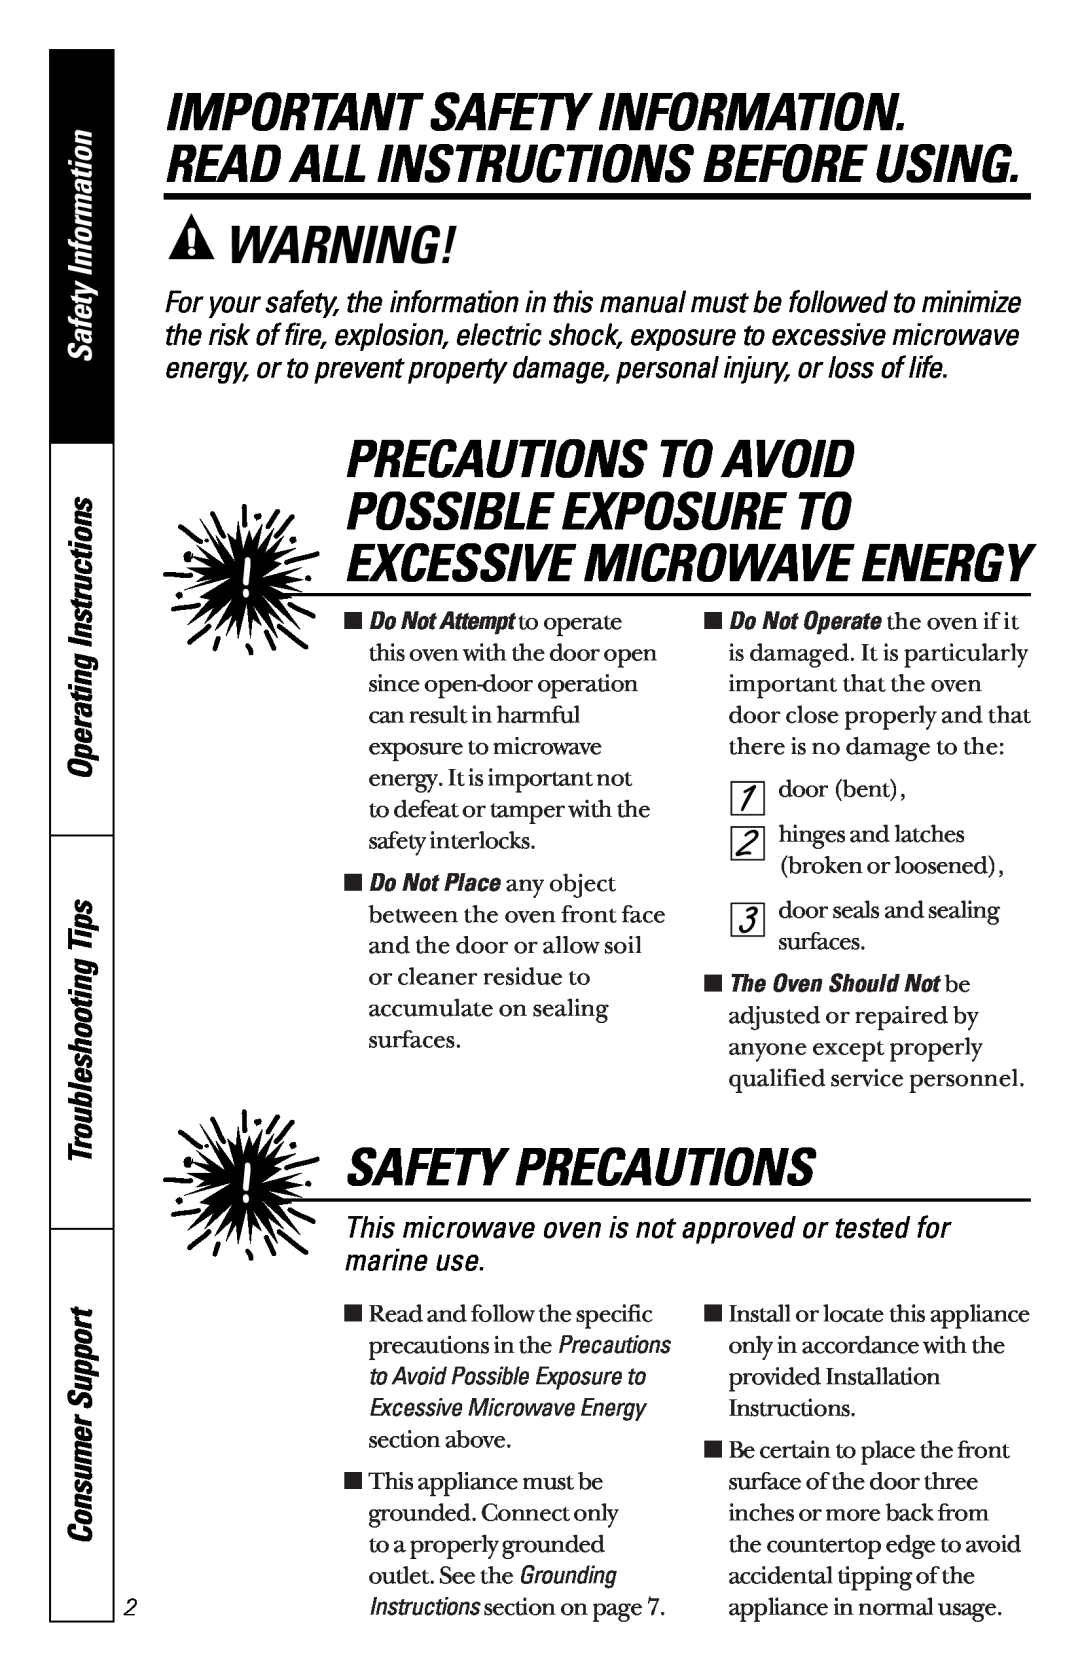 GE JES1133WD Precautions To Avoid, Safety Precautions, Possible Exposure To Excessive Microwave Energy, Safety Information 